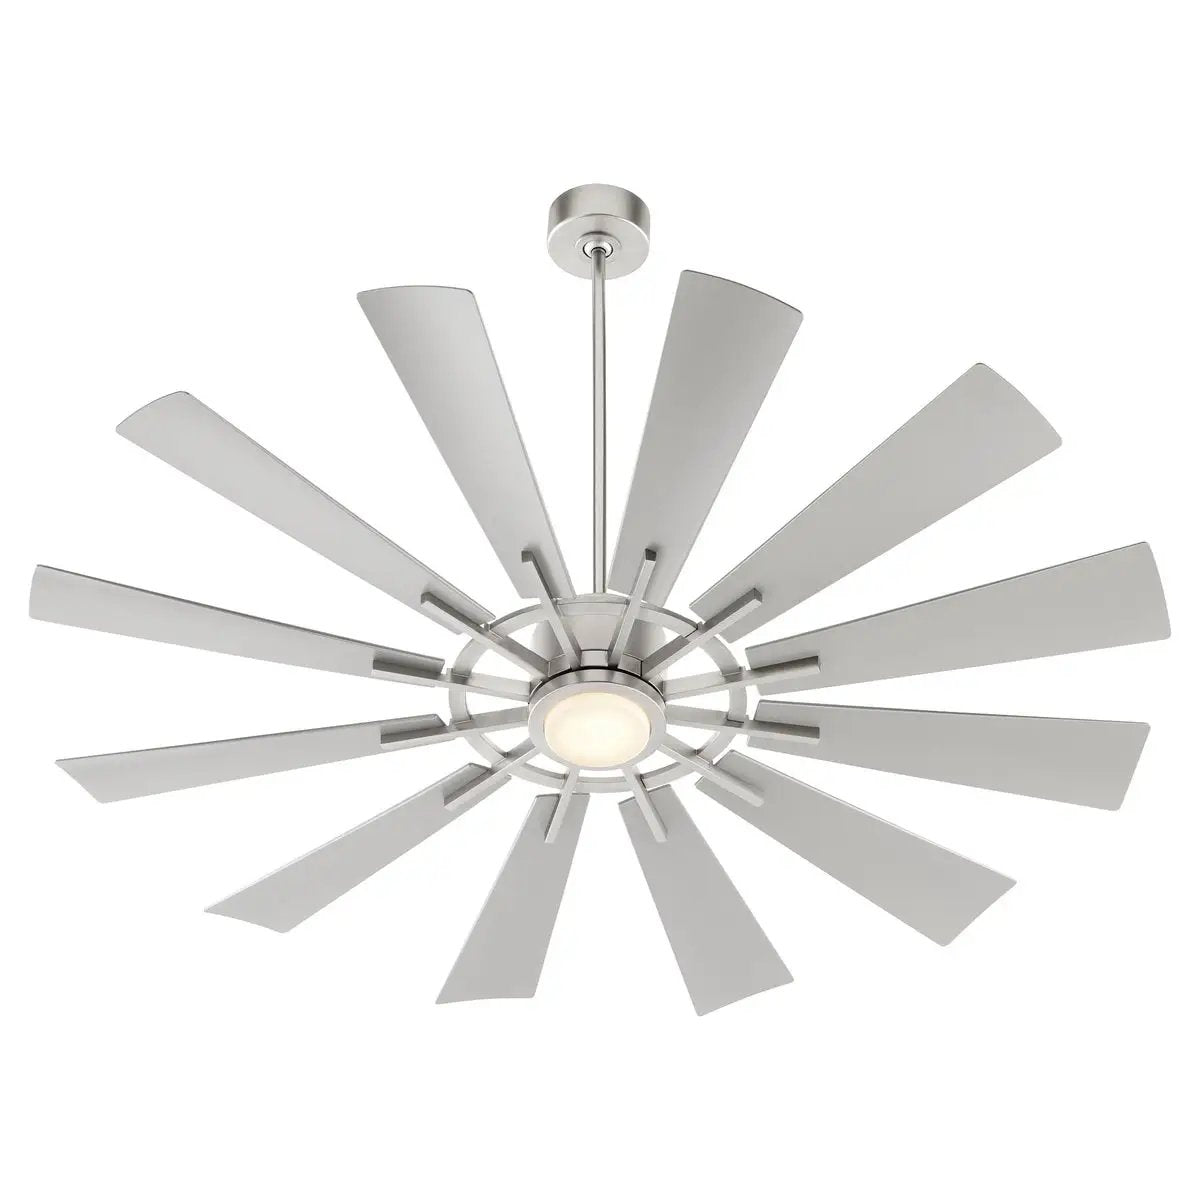 Outdoor Ceiling Fan with Light, a high-performance fan with wood stained blades, dark chromatic housing, and iron elements. 6-speed options. 12 blades, 60" span, 14-degree pitch. UL Listed for damp locations. LED lamp included. Dimensions: 15"H x 60"W. Limited Lifetime warranty.